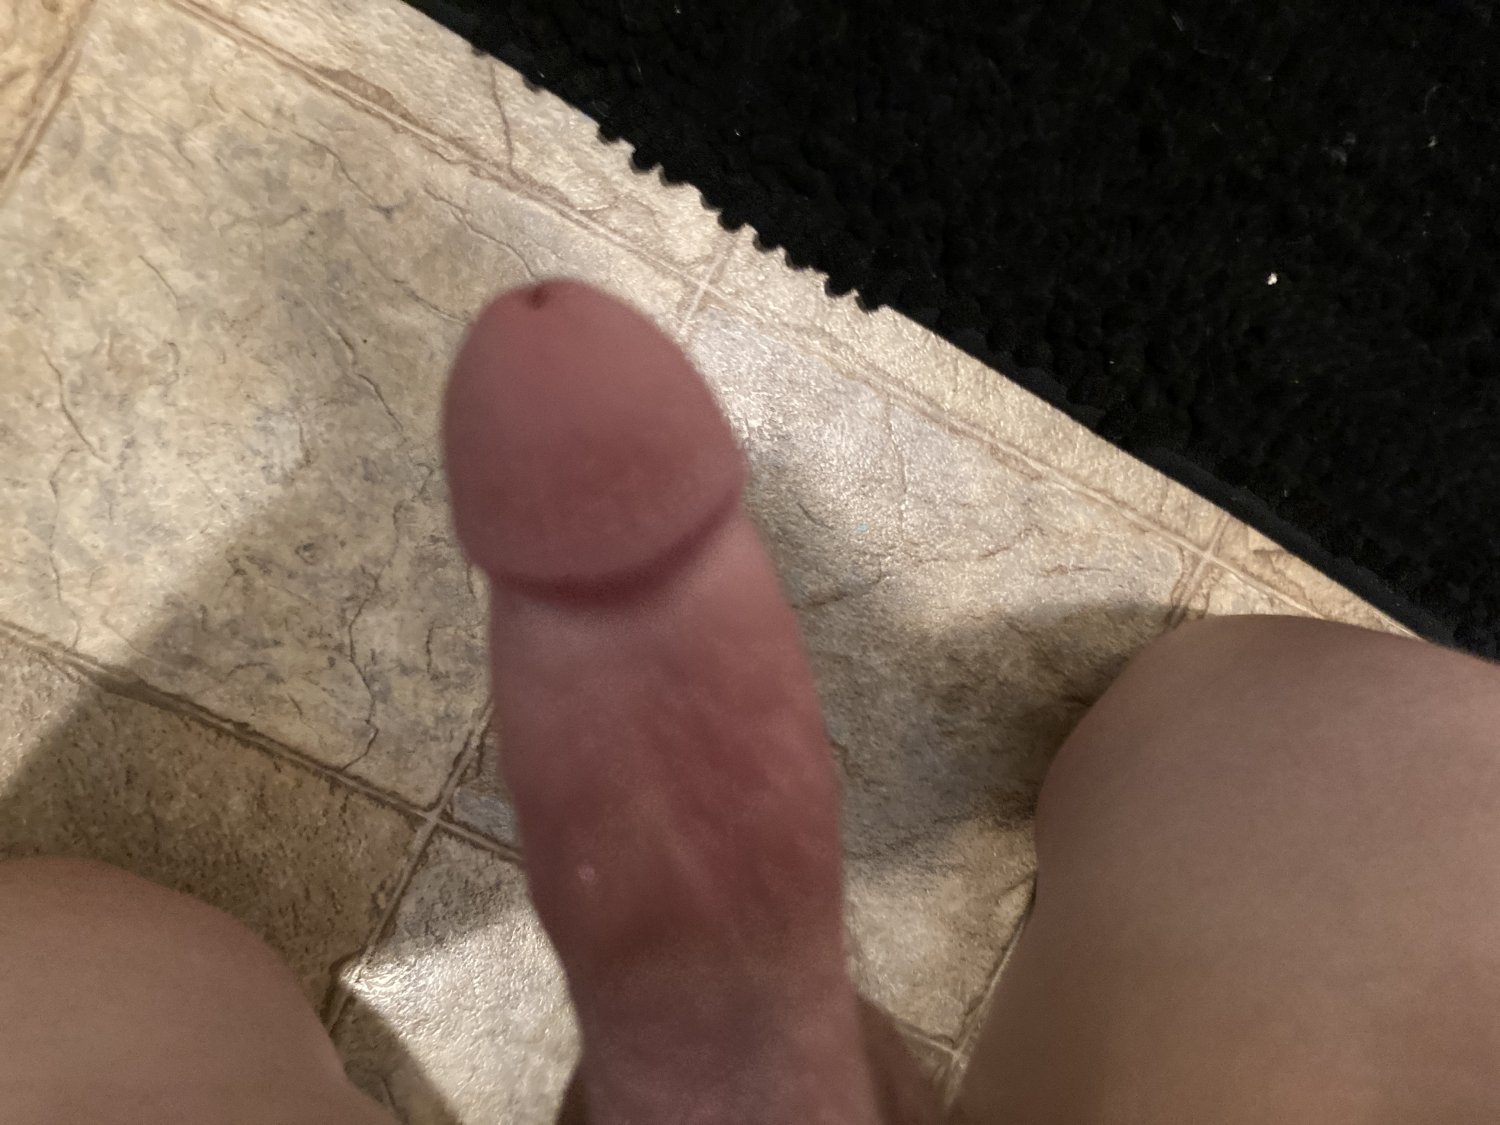 Me and my small penis but size don't matter - Porn - EroMe